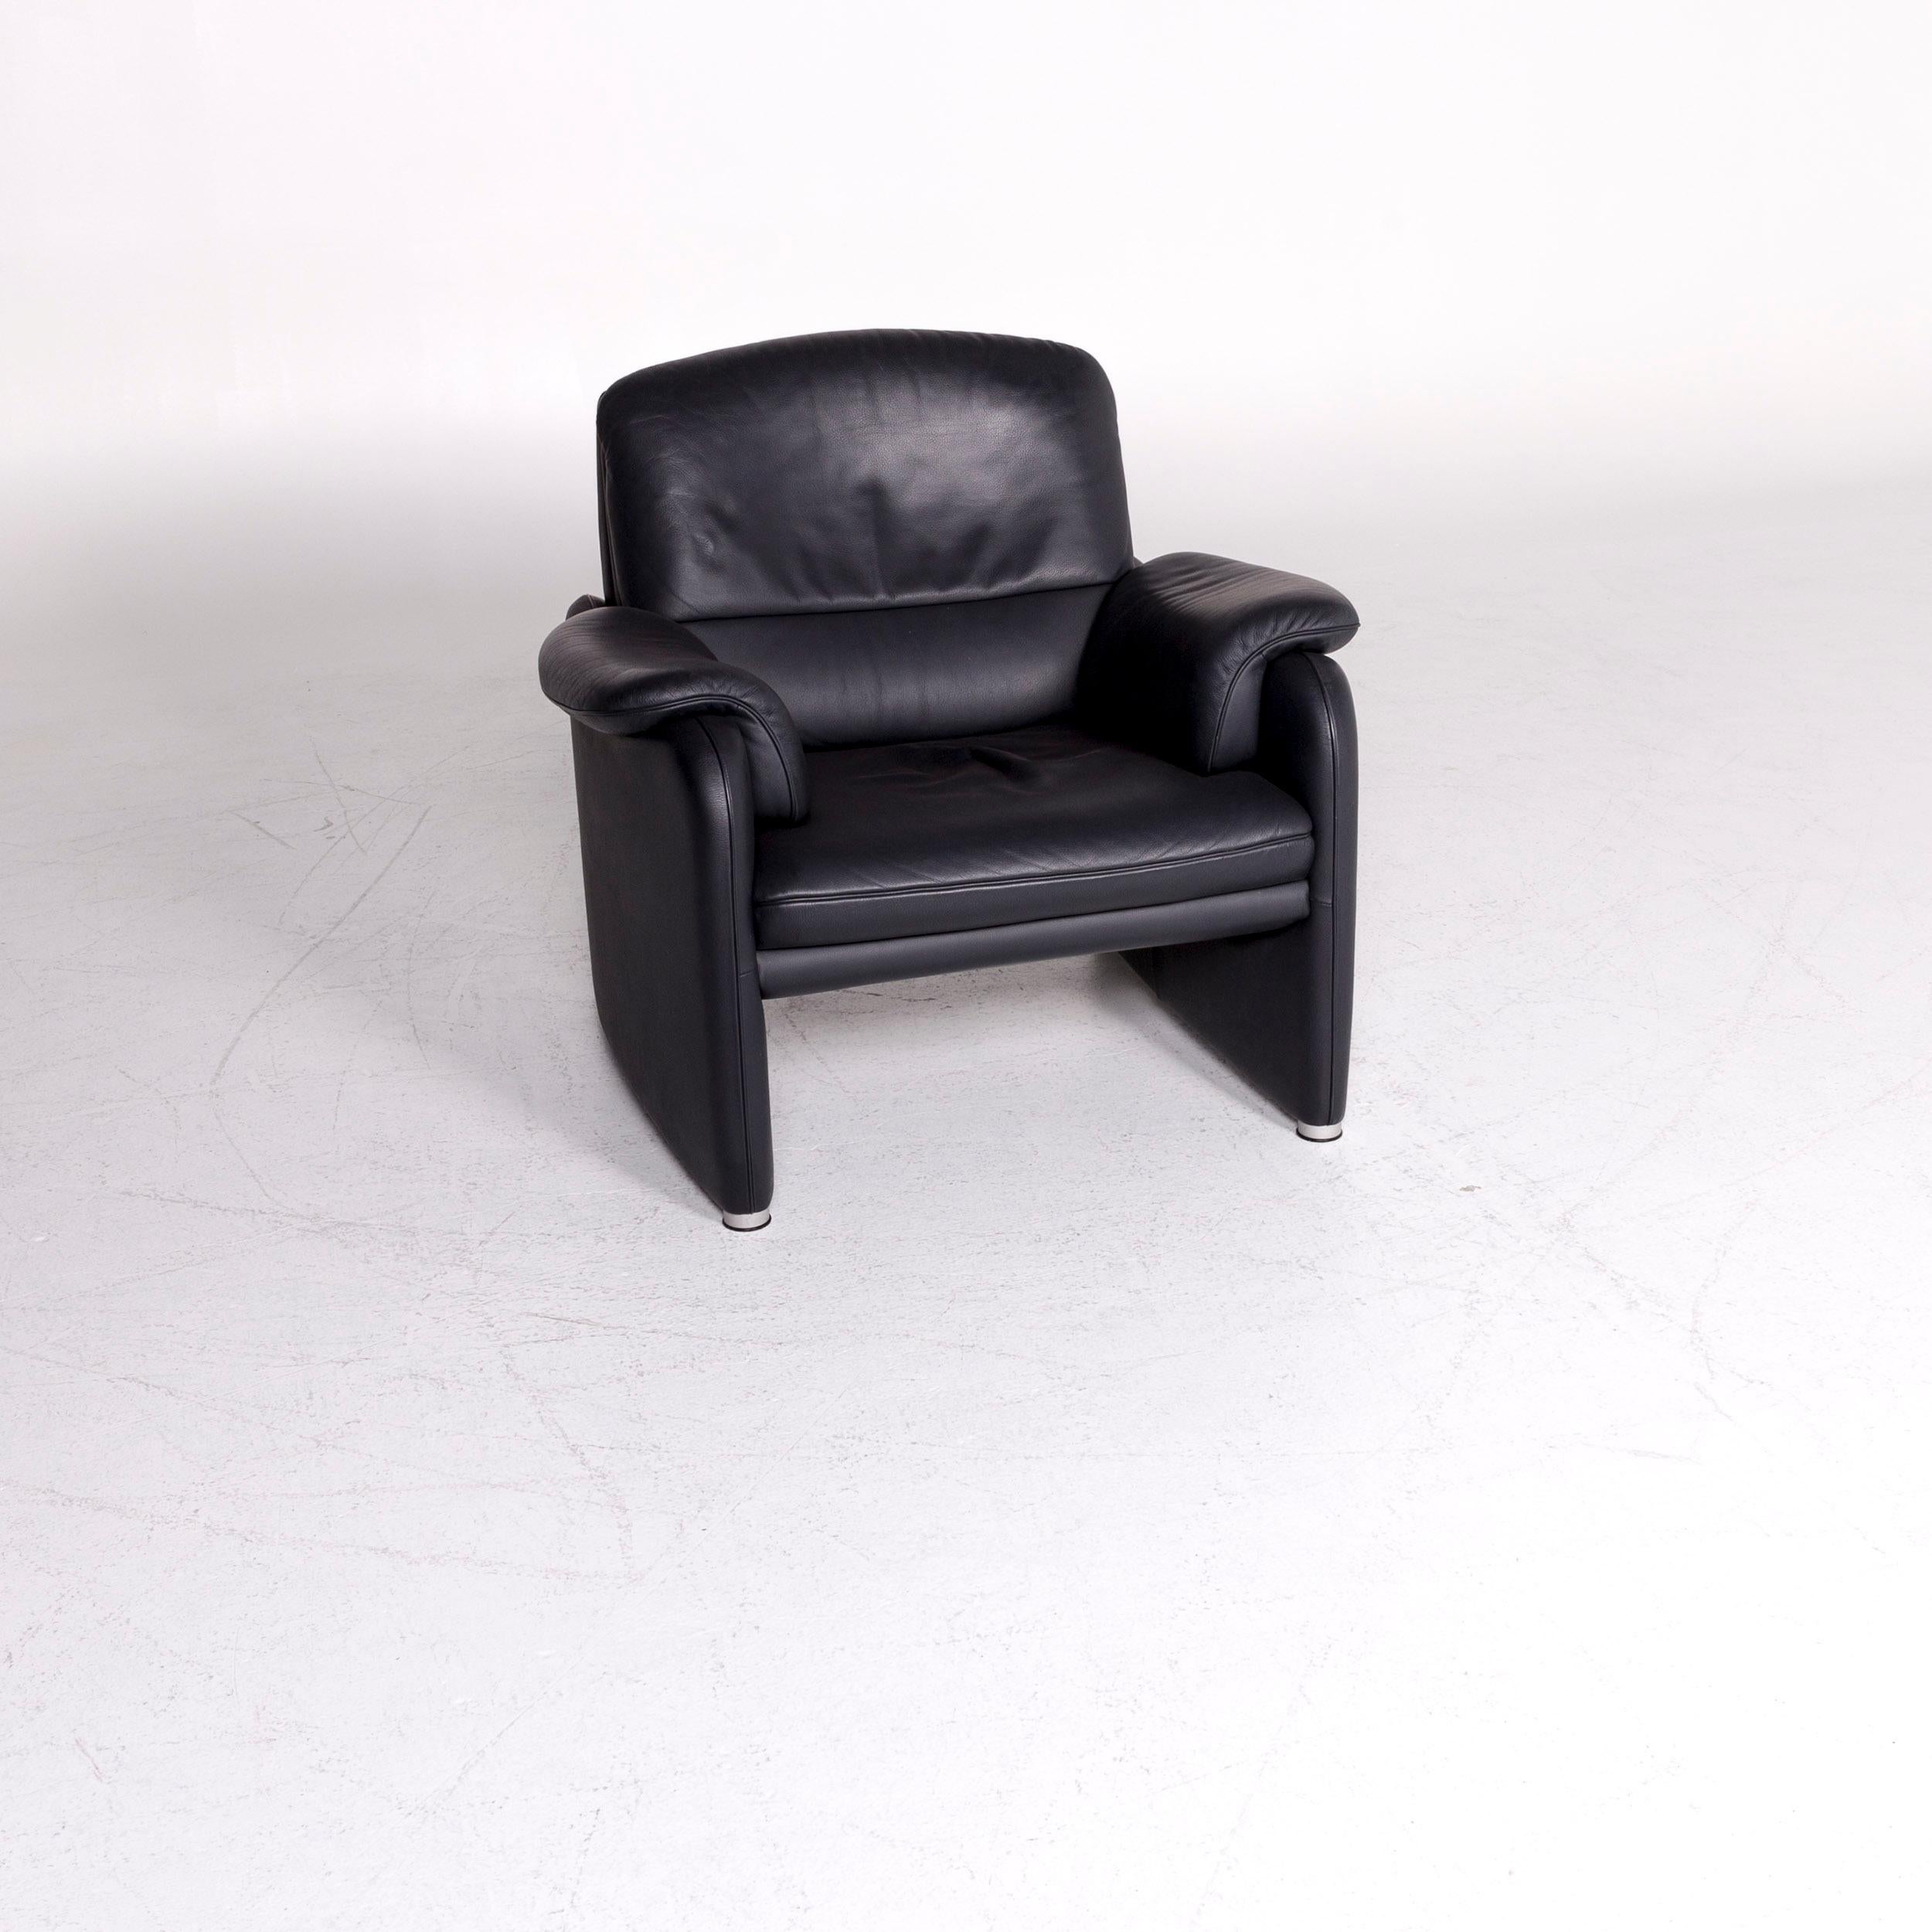 We bring to you a De Sede designer leather armchair black armchair.

Product measurements in centimeters:

Depth 91
Width 94
Height 85
Seat-height 43
Rest-height 62
Seat-depth 50
Seat-width 43
Back-height 46.
    